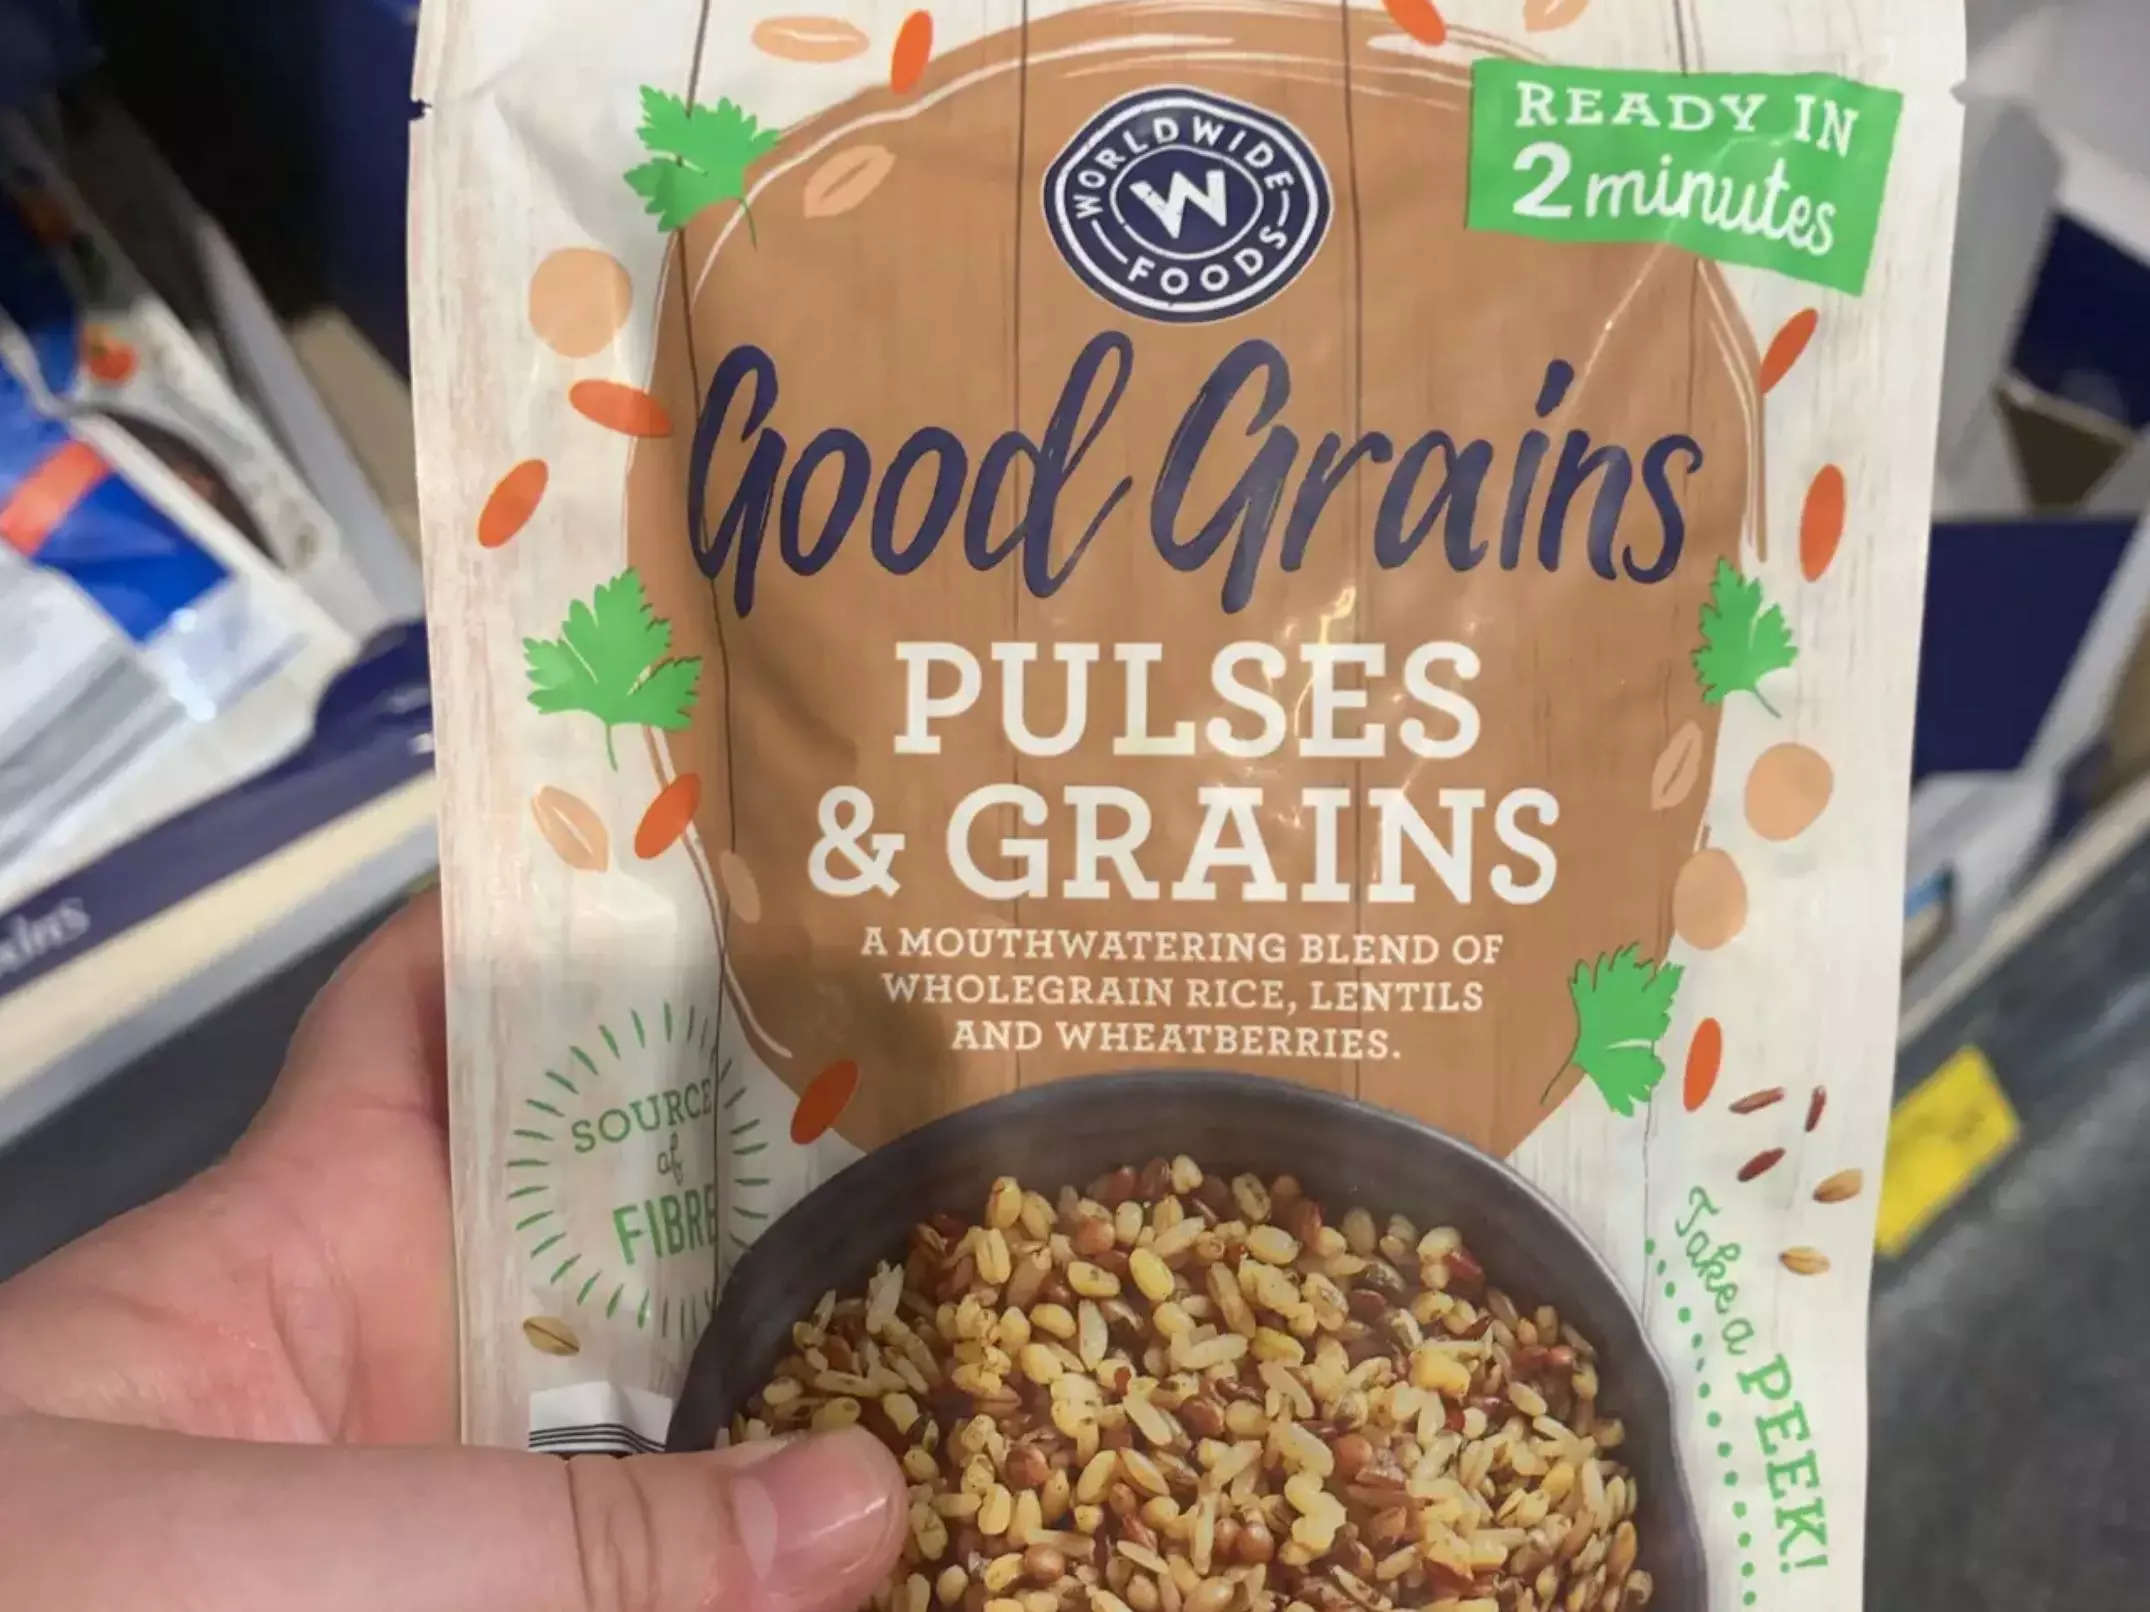 Worldwide Foods pulses and grains in a pouch